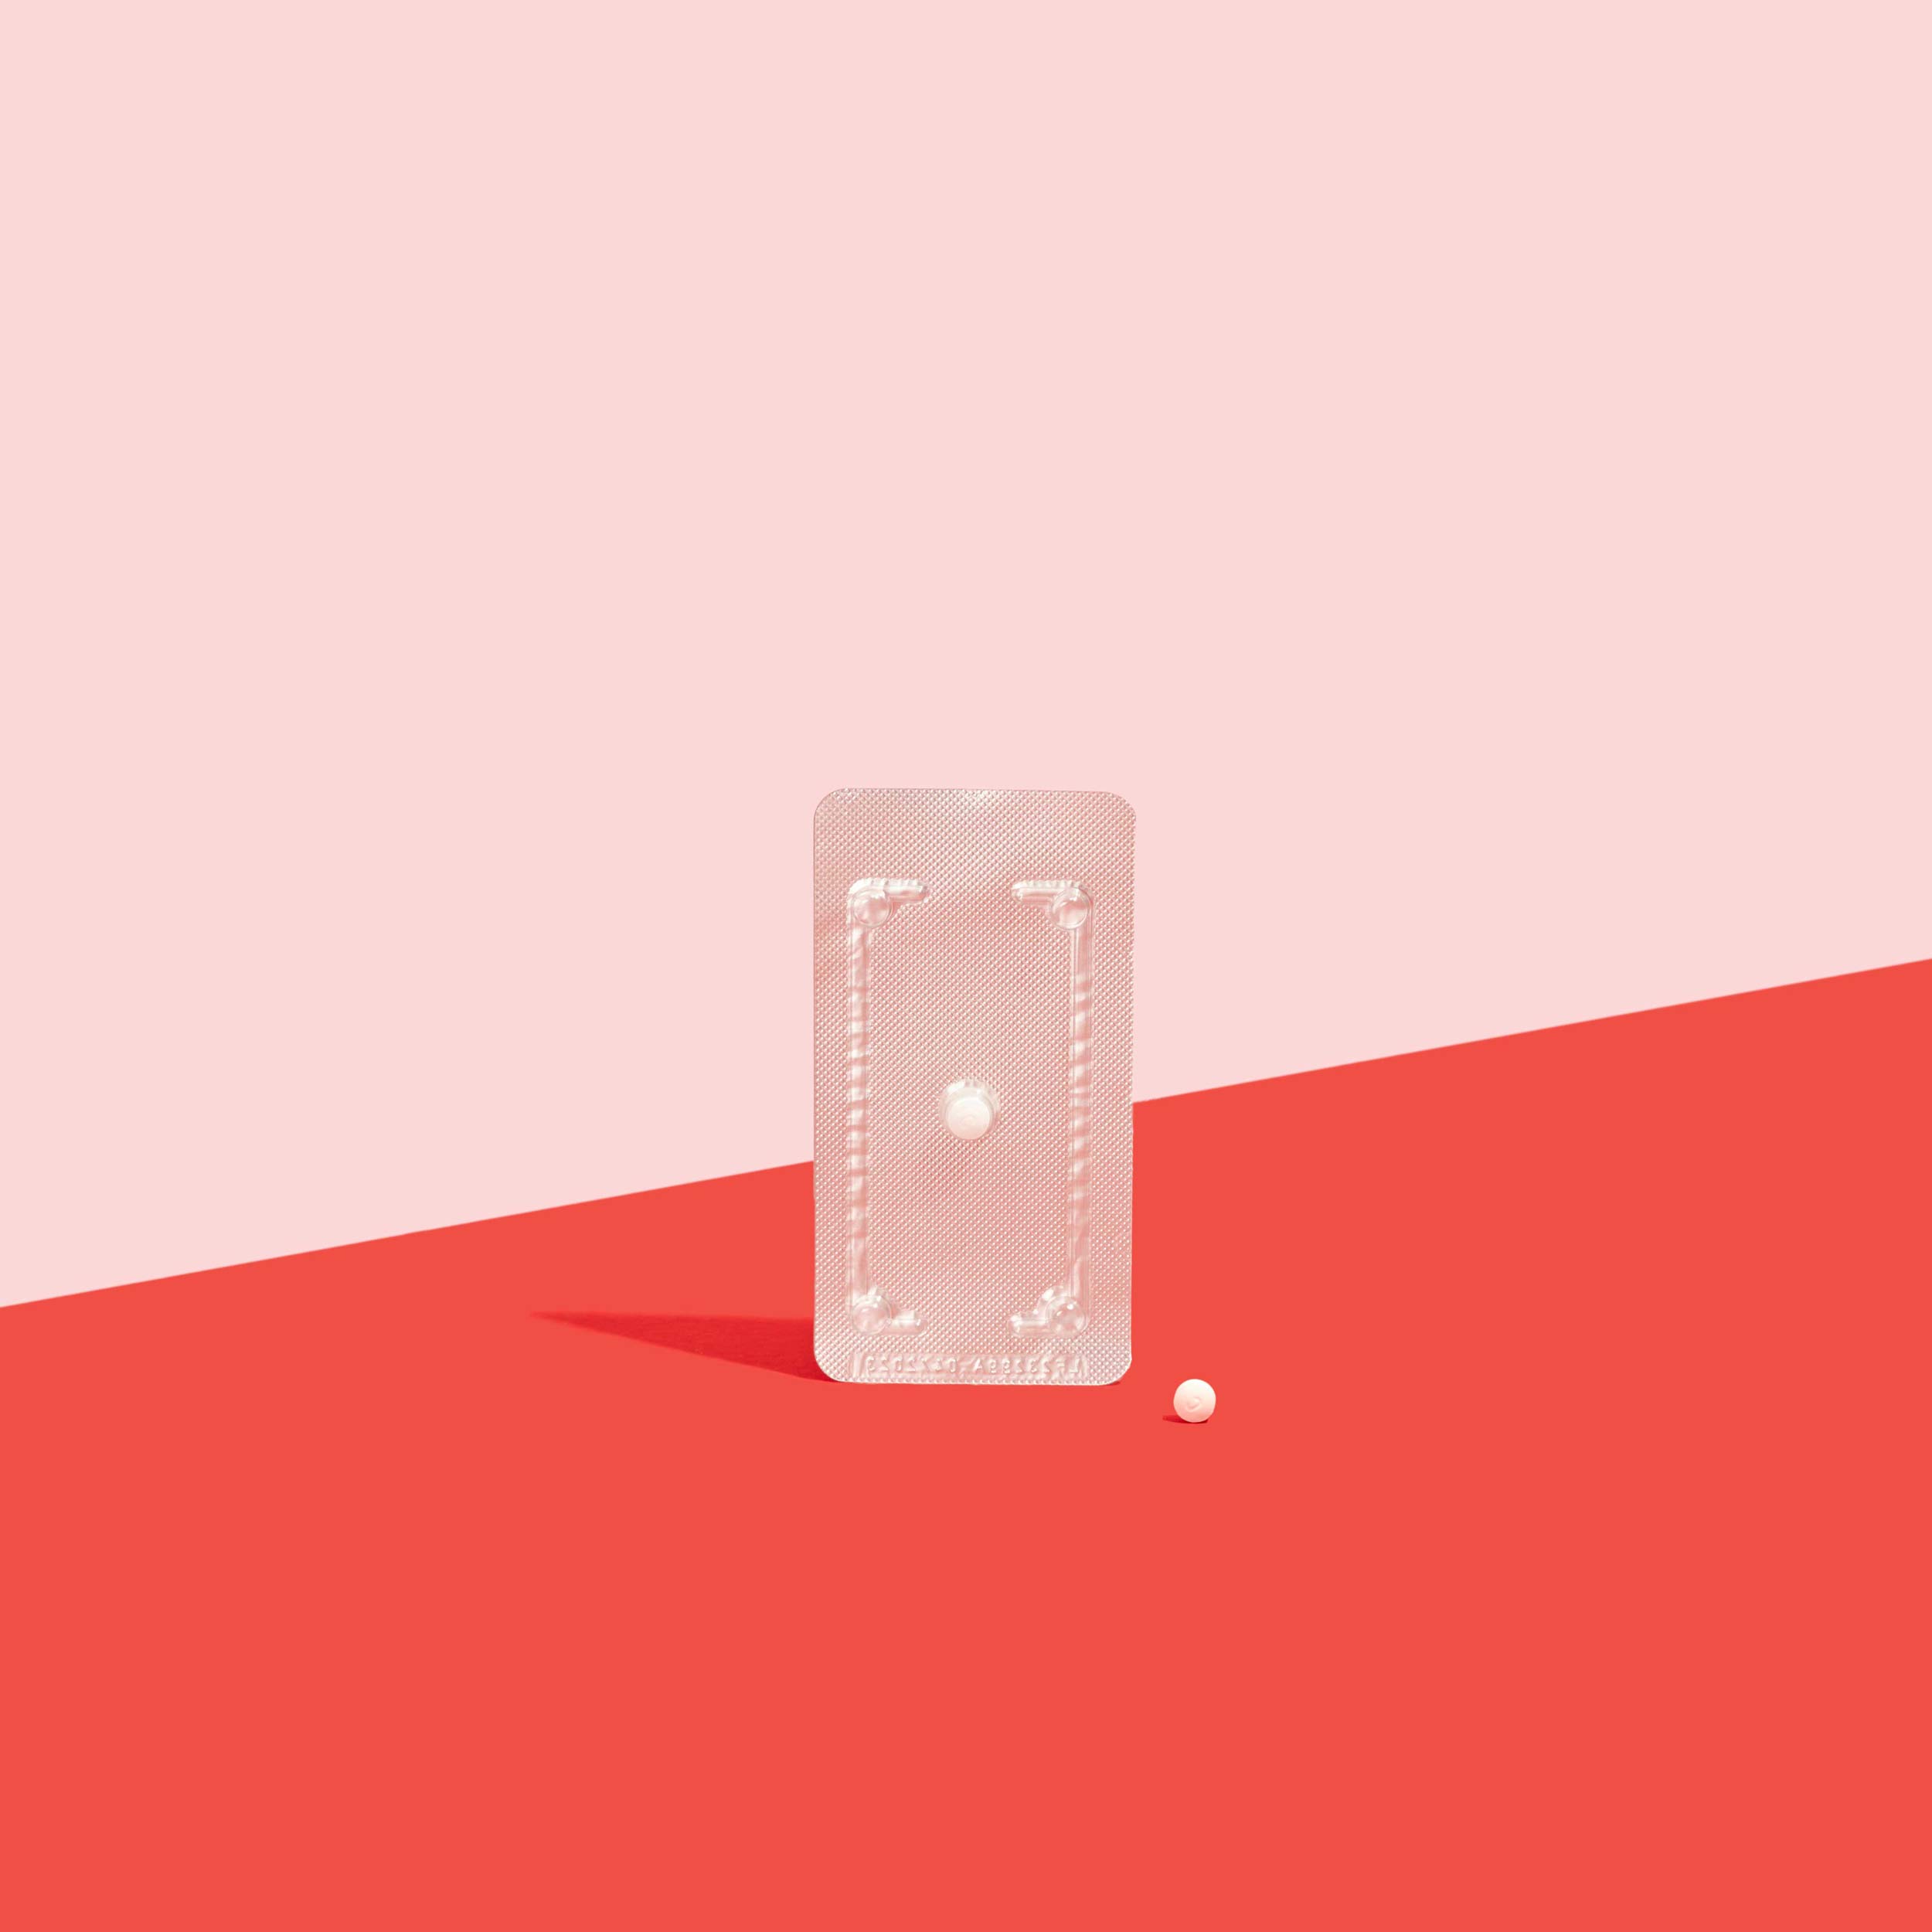 Plan B emergency contraception in foil packet to prevent pregnancy on a red surface, on a pink background